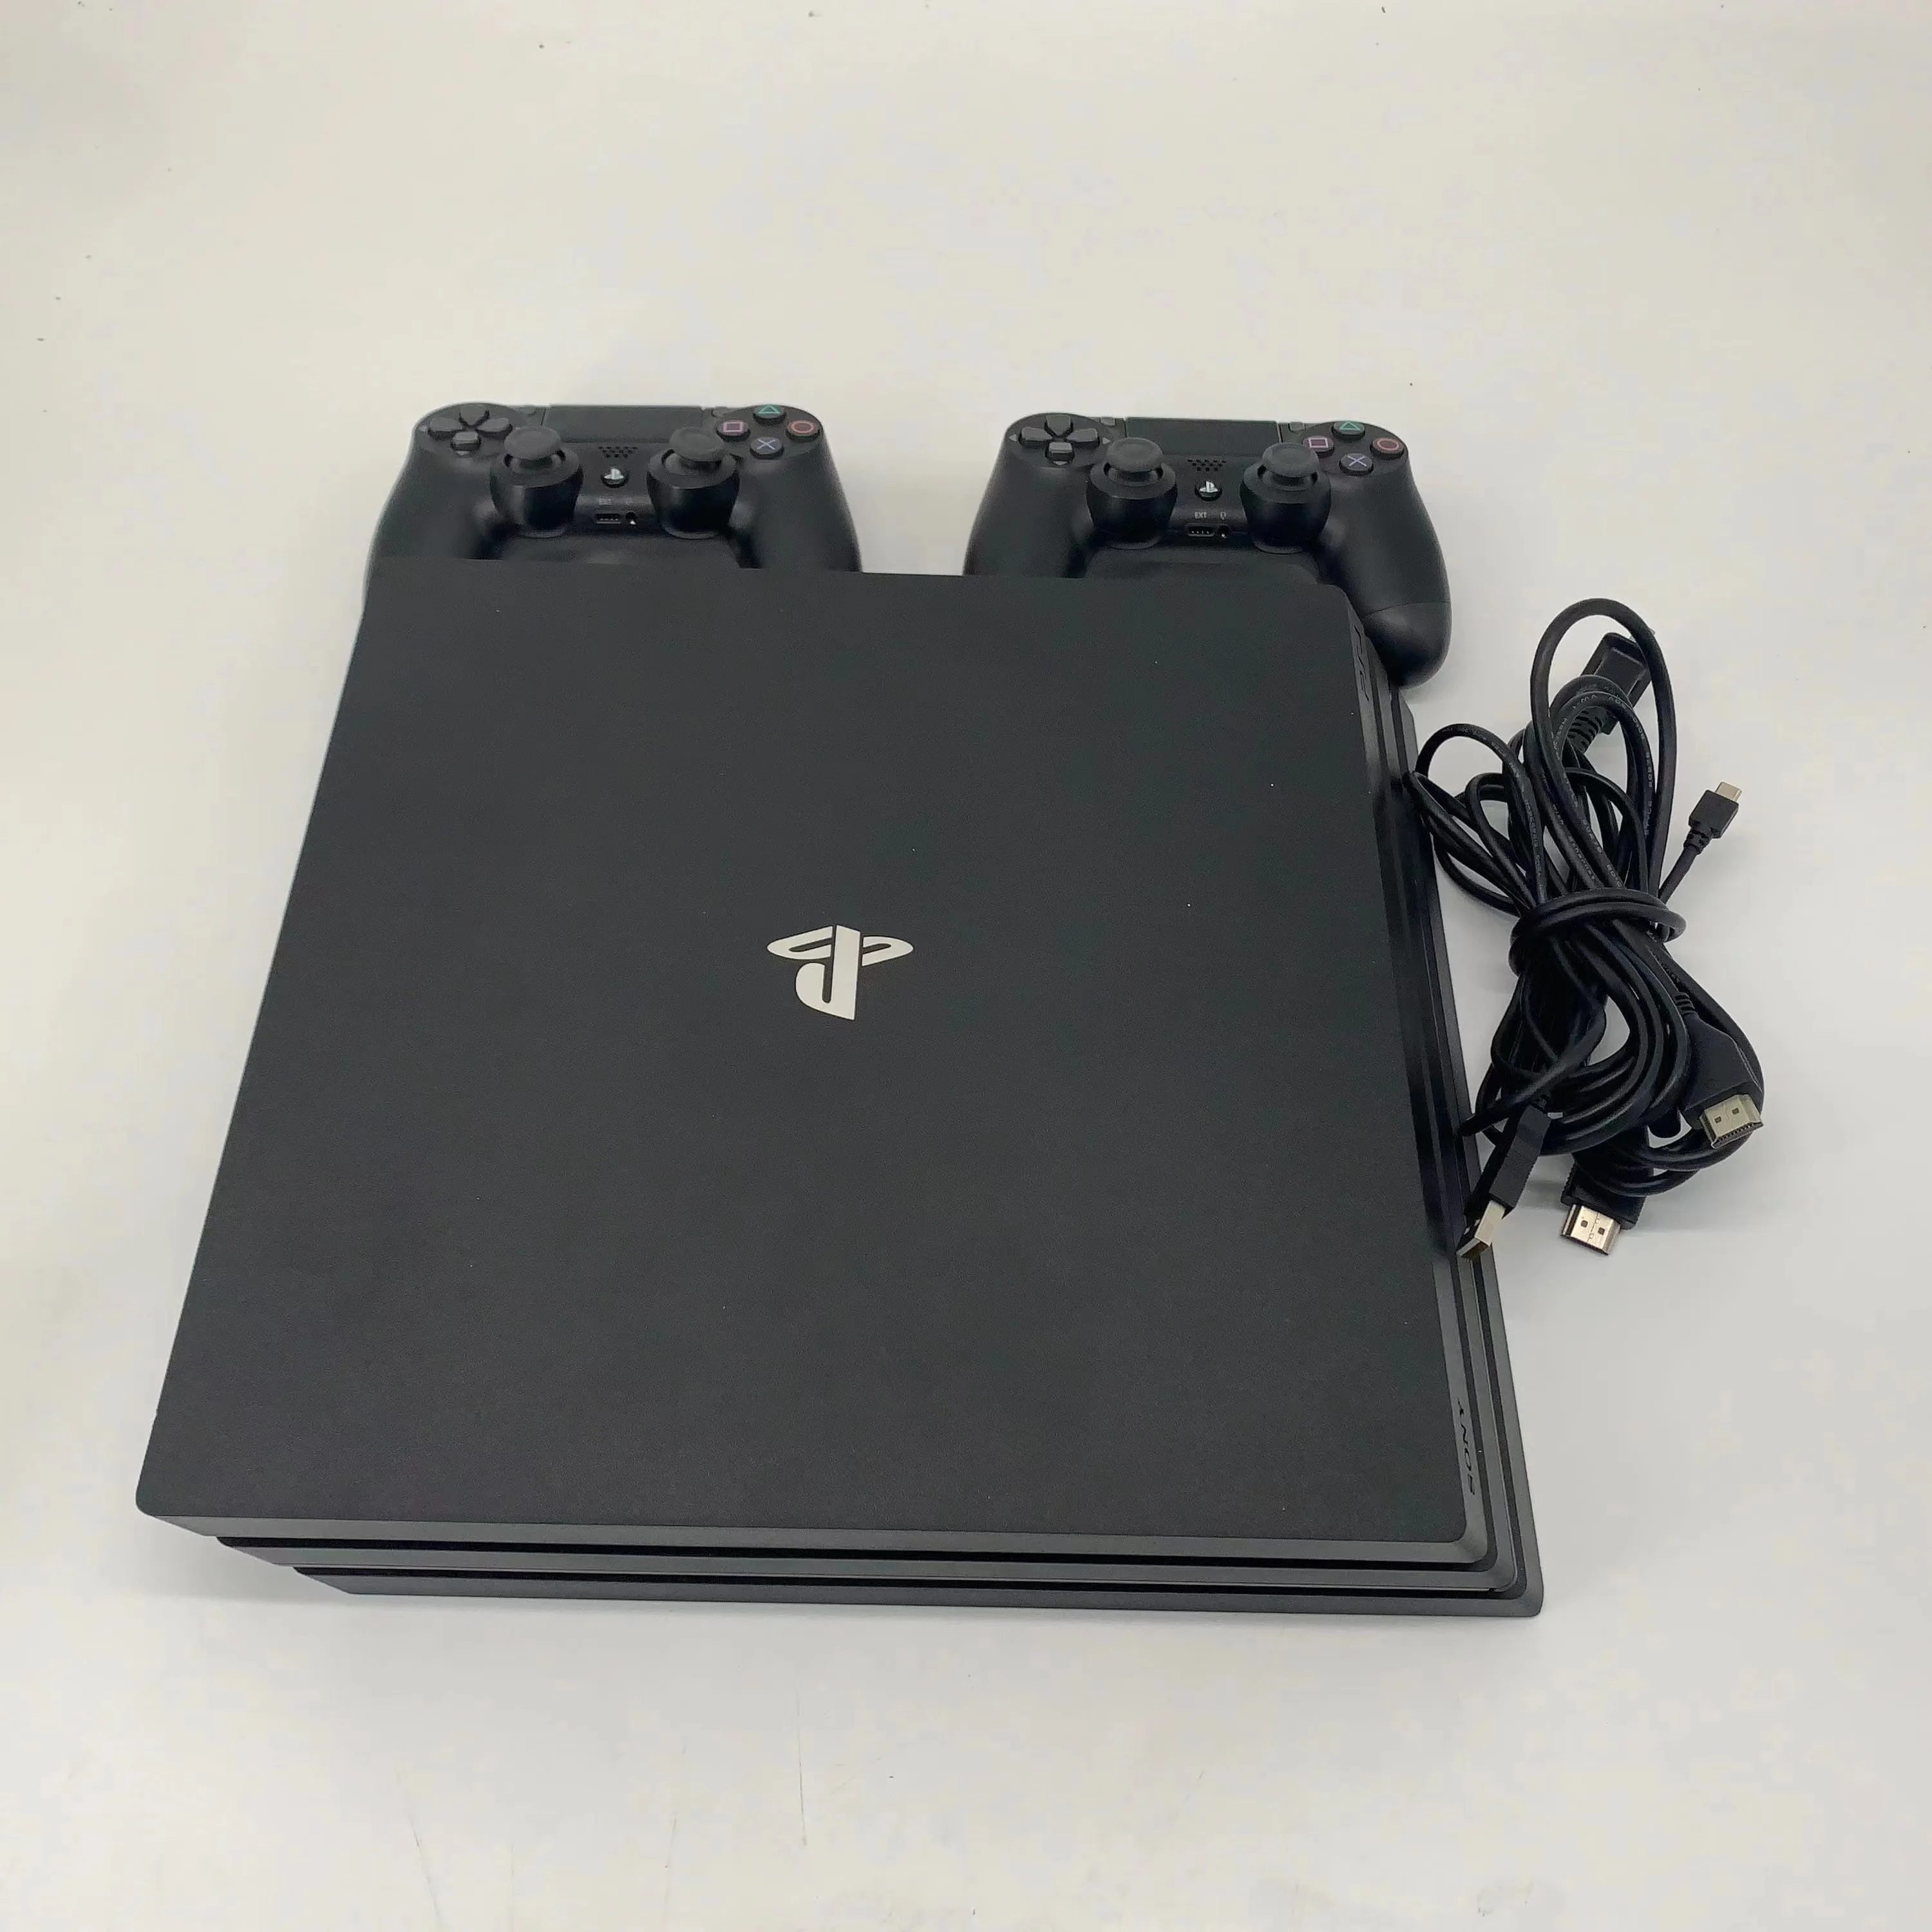 ballade Uheldig filter Source Wholesale Used Original PS4 pro for Sony playstation Slim pro 4 1 TB  video game 512g handheld game console on m.alibaba.com